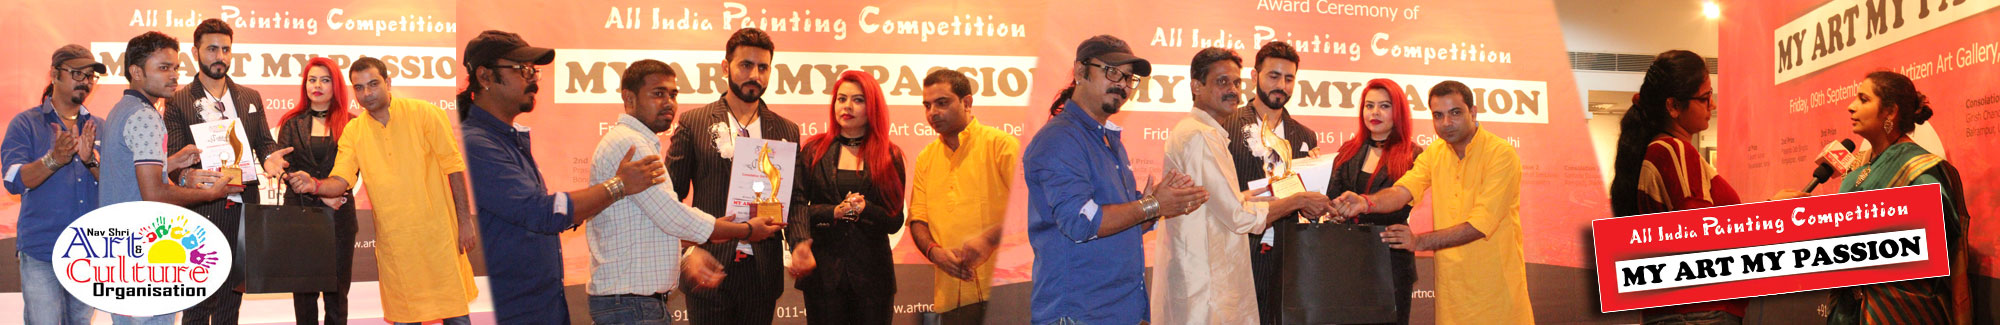 All India Painting Competition - My Art My Passion